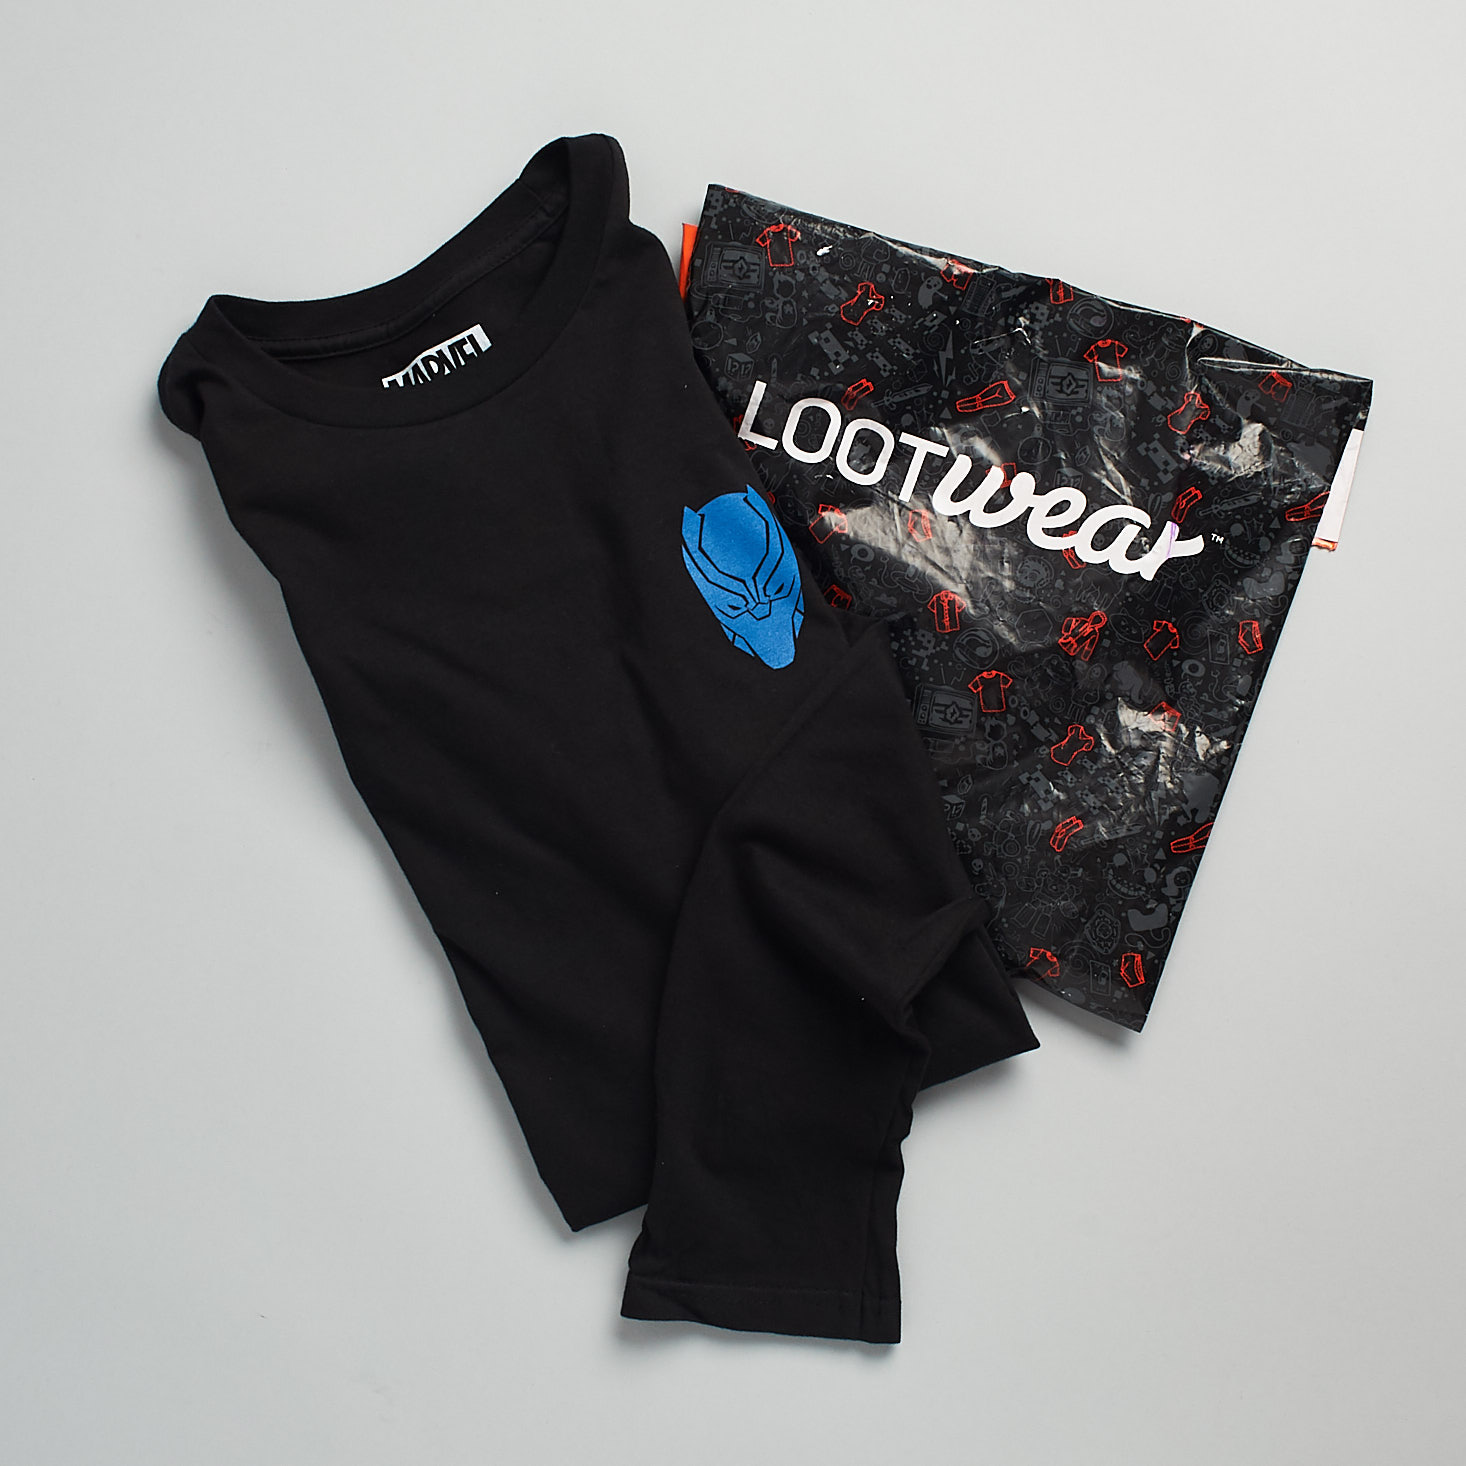 Loot Wearables Subscription by Loot Crate Review + Coupon – February 2018